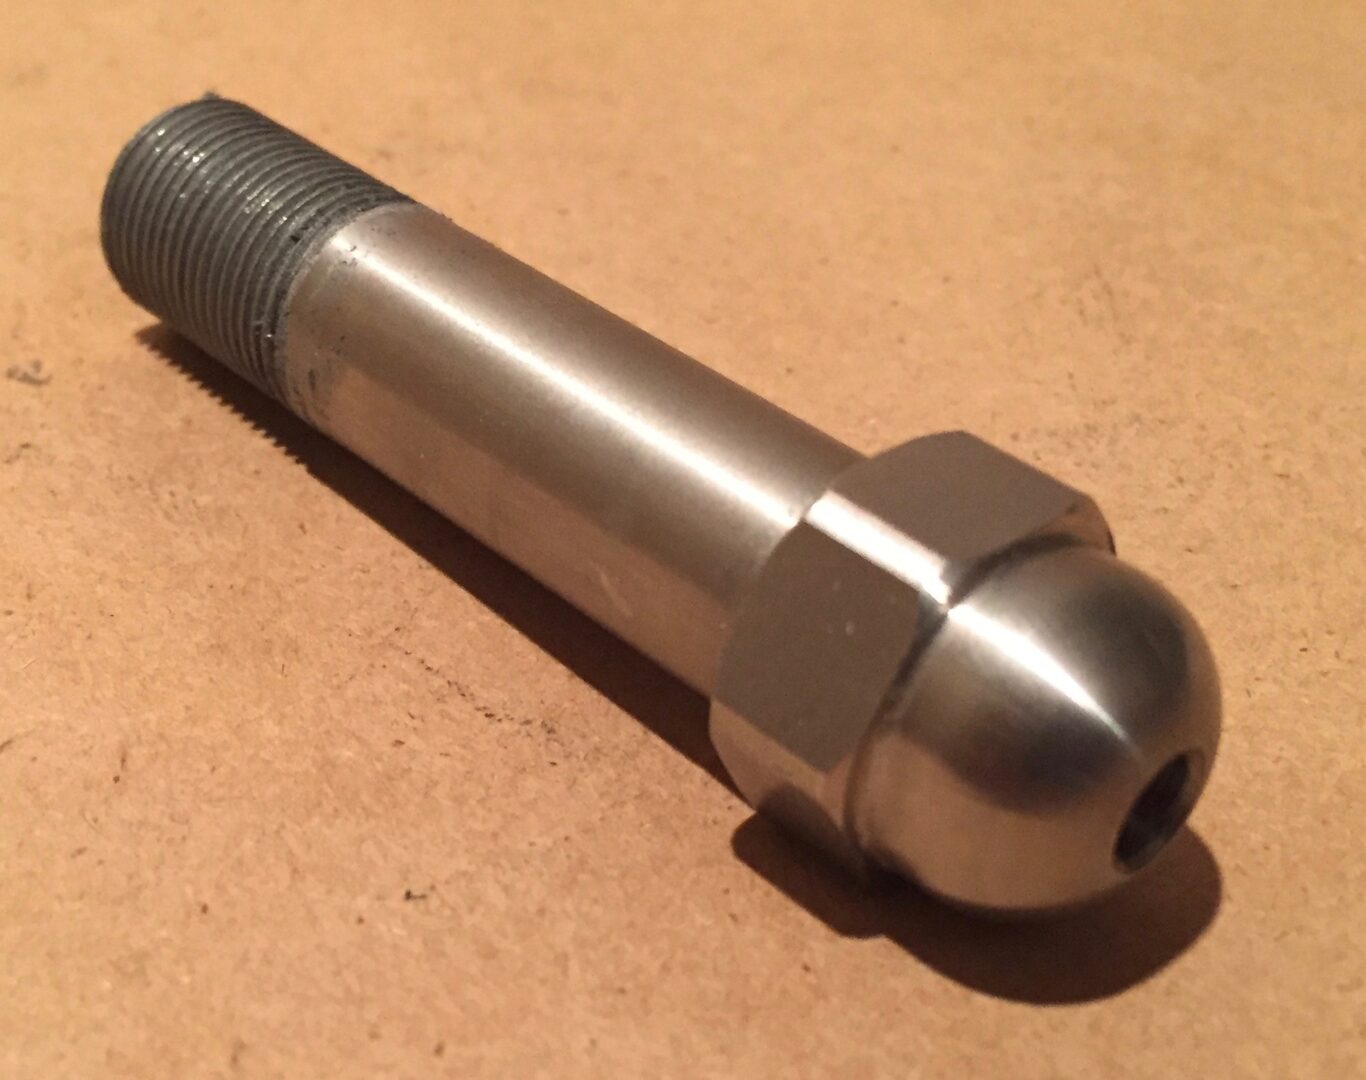 Extension Bolt M13 x 1.00 available at Solo Props